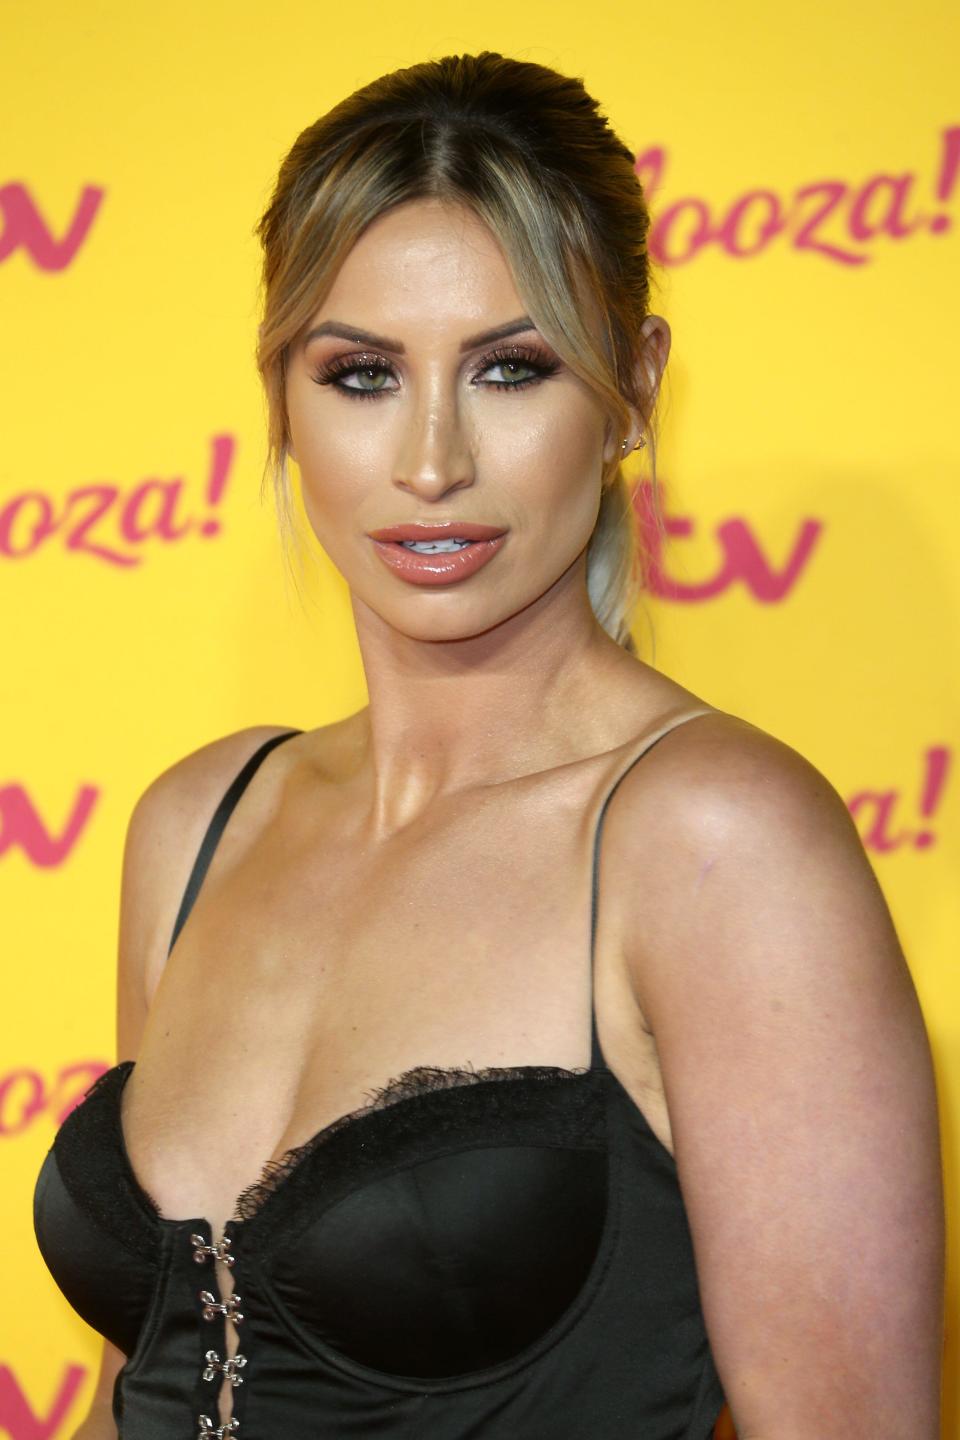 Ferne McCann starred in Towie from 2013 to 2016. (PA Images)